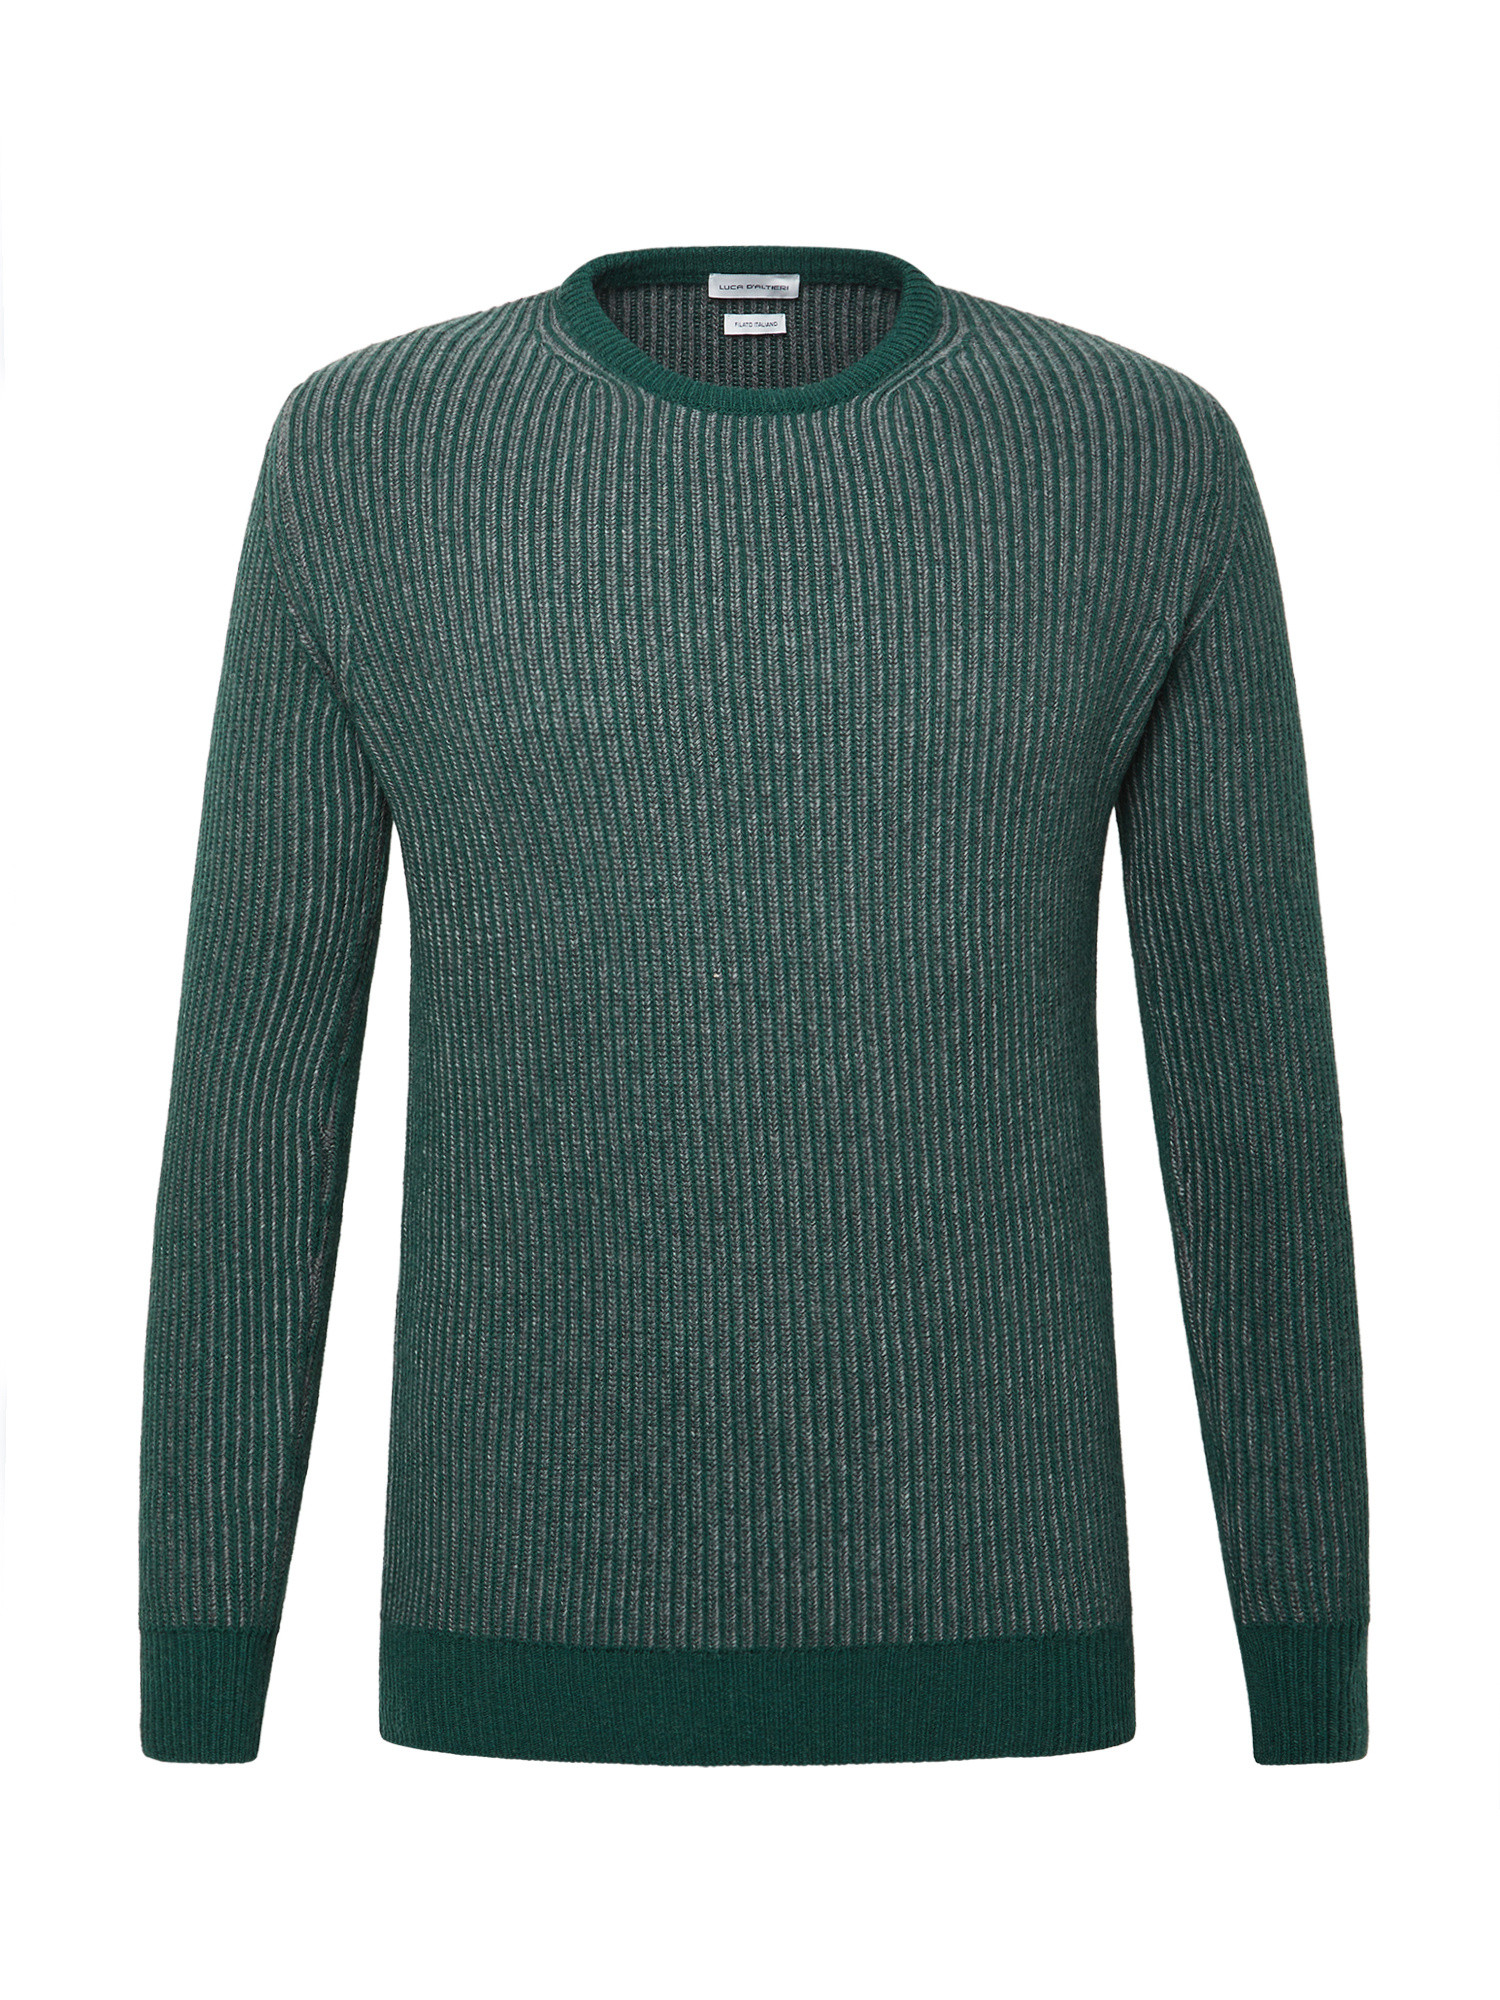 Luca D'Altieri - Cashmere blend crew neck sweater with noble fibres, Green, large image number 0